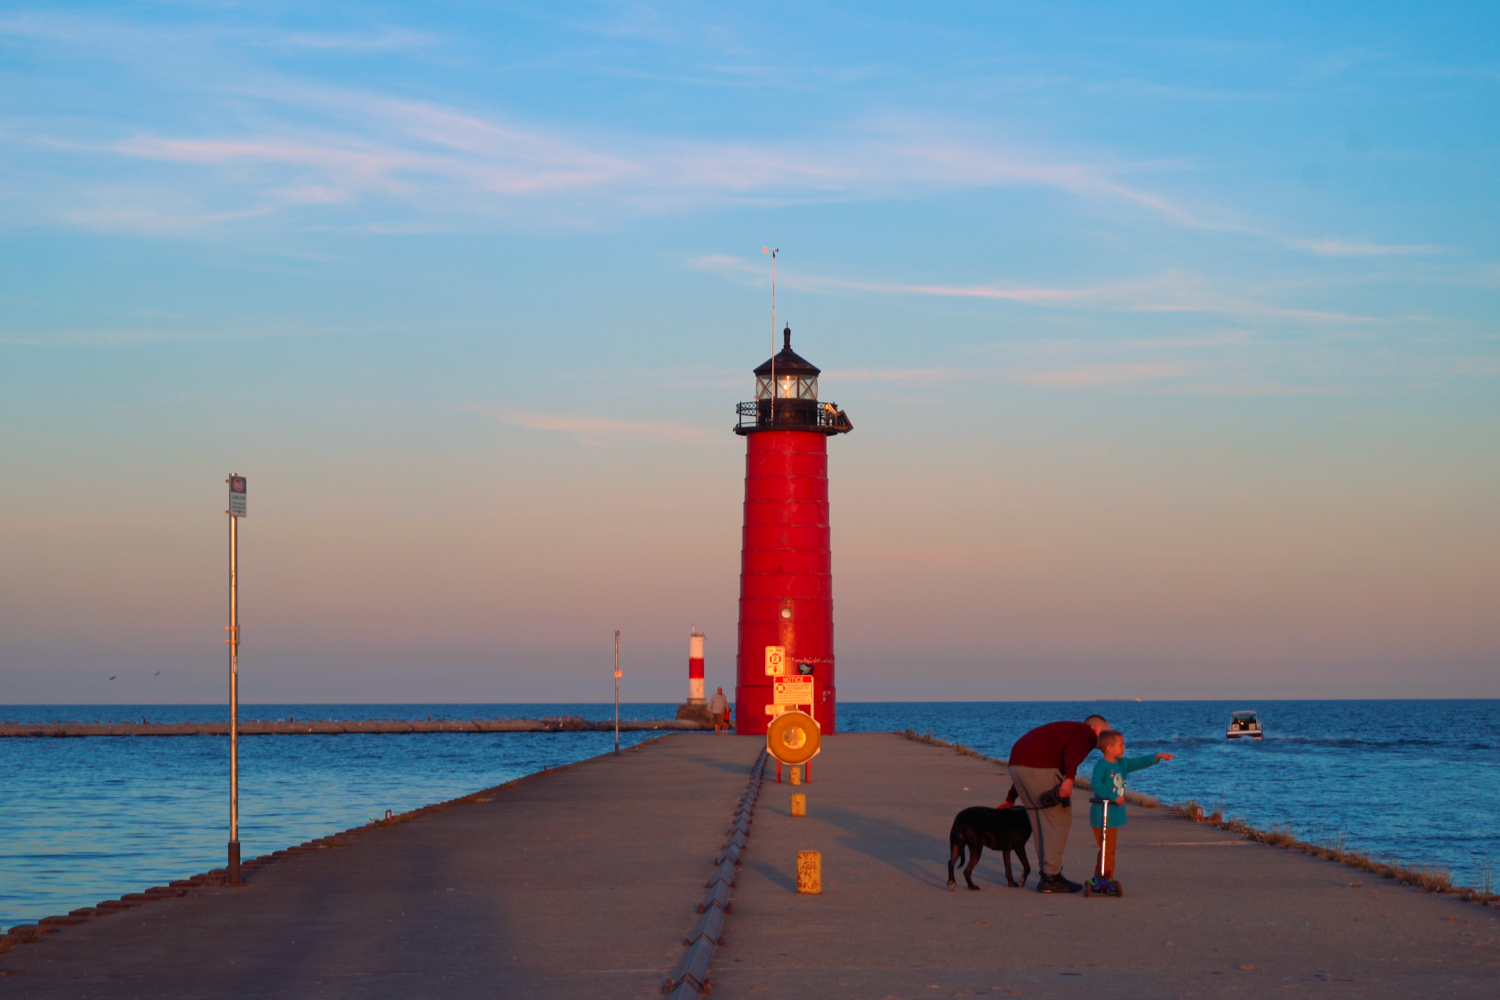 The iconic North Pier Lighthouse in Kenosha was built in 1906 and still serves as the active ligh...